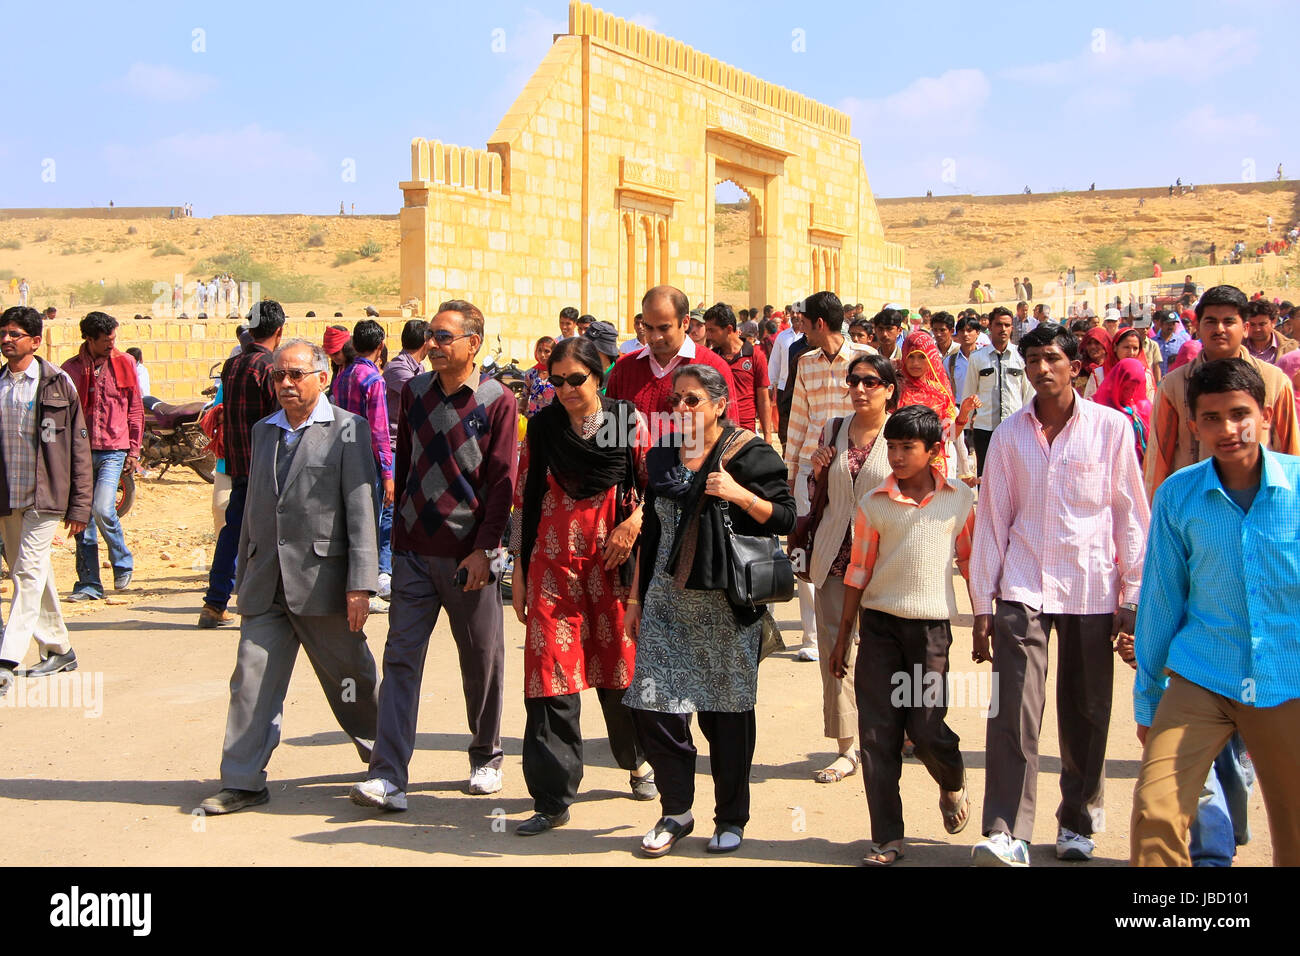 Local people walking from Desert Festival performance in Jaisalmer, Rajasthan, India Stock Photo